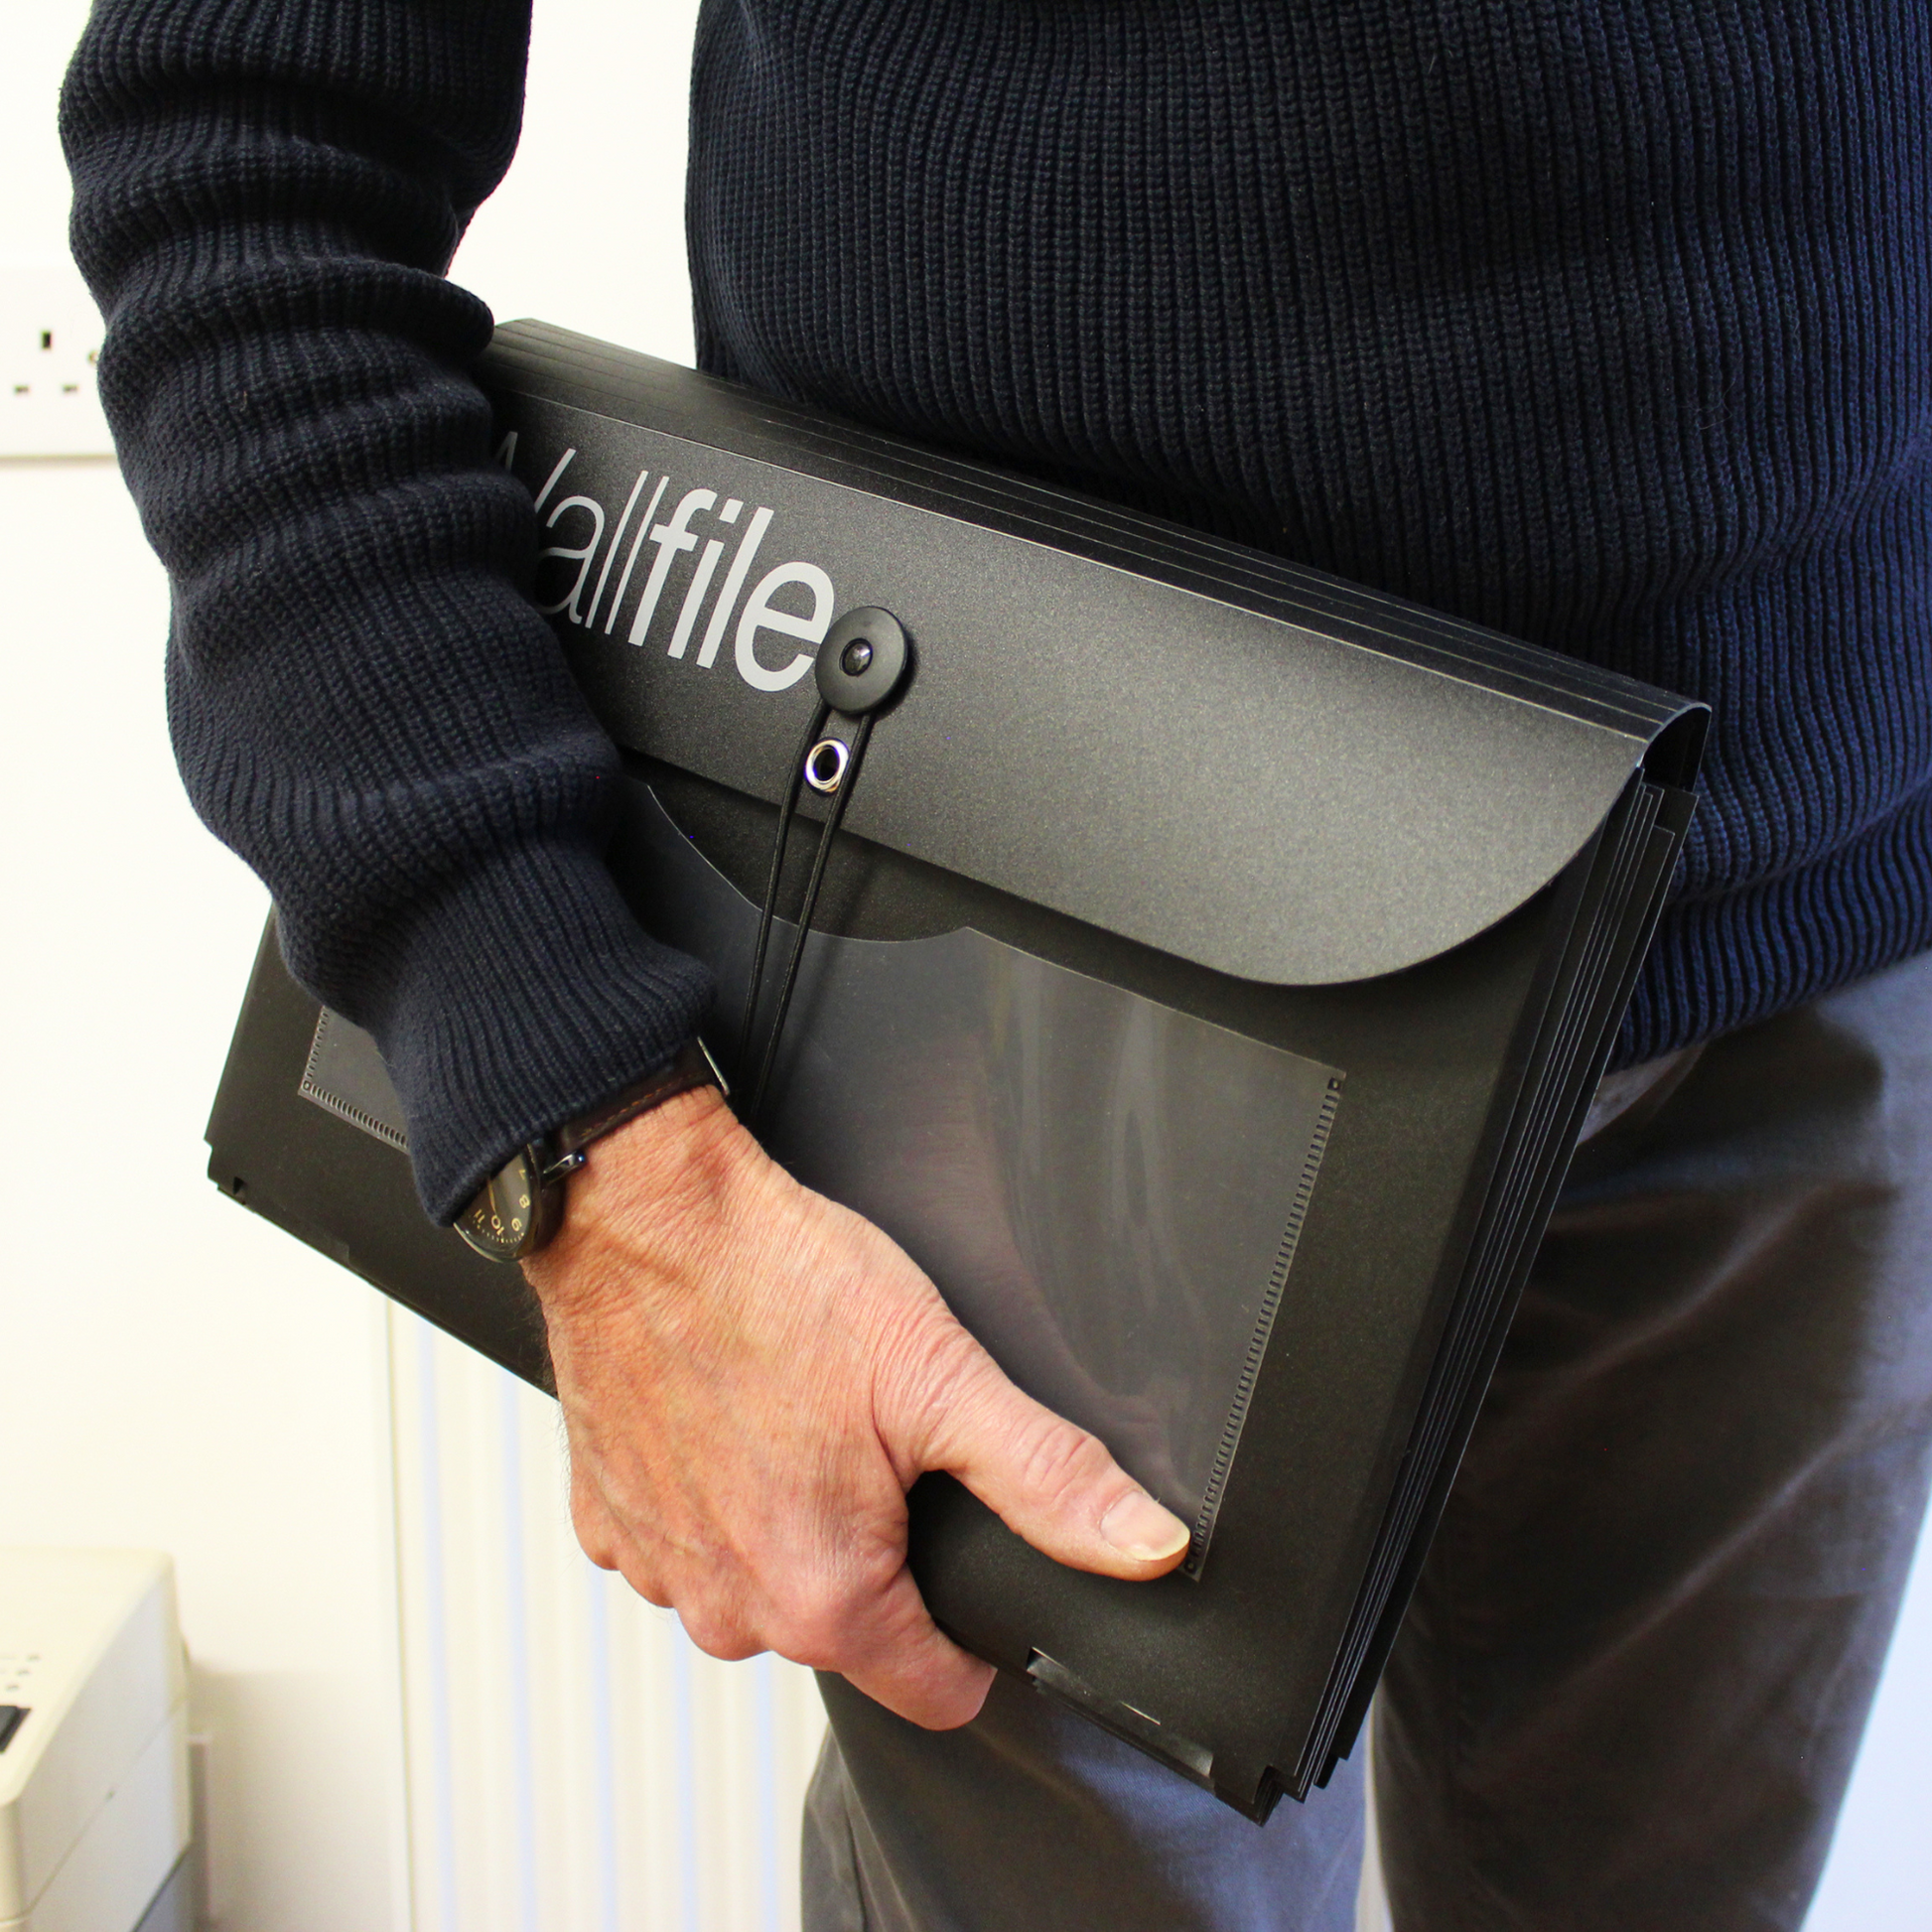 Person holding a black Wallfile organizer under their arm, illustrating the portability and lightweight design of the product for easy transport and setup.